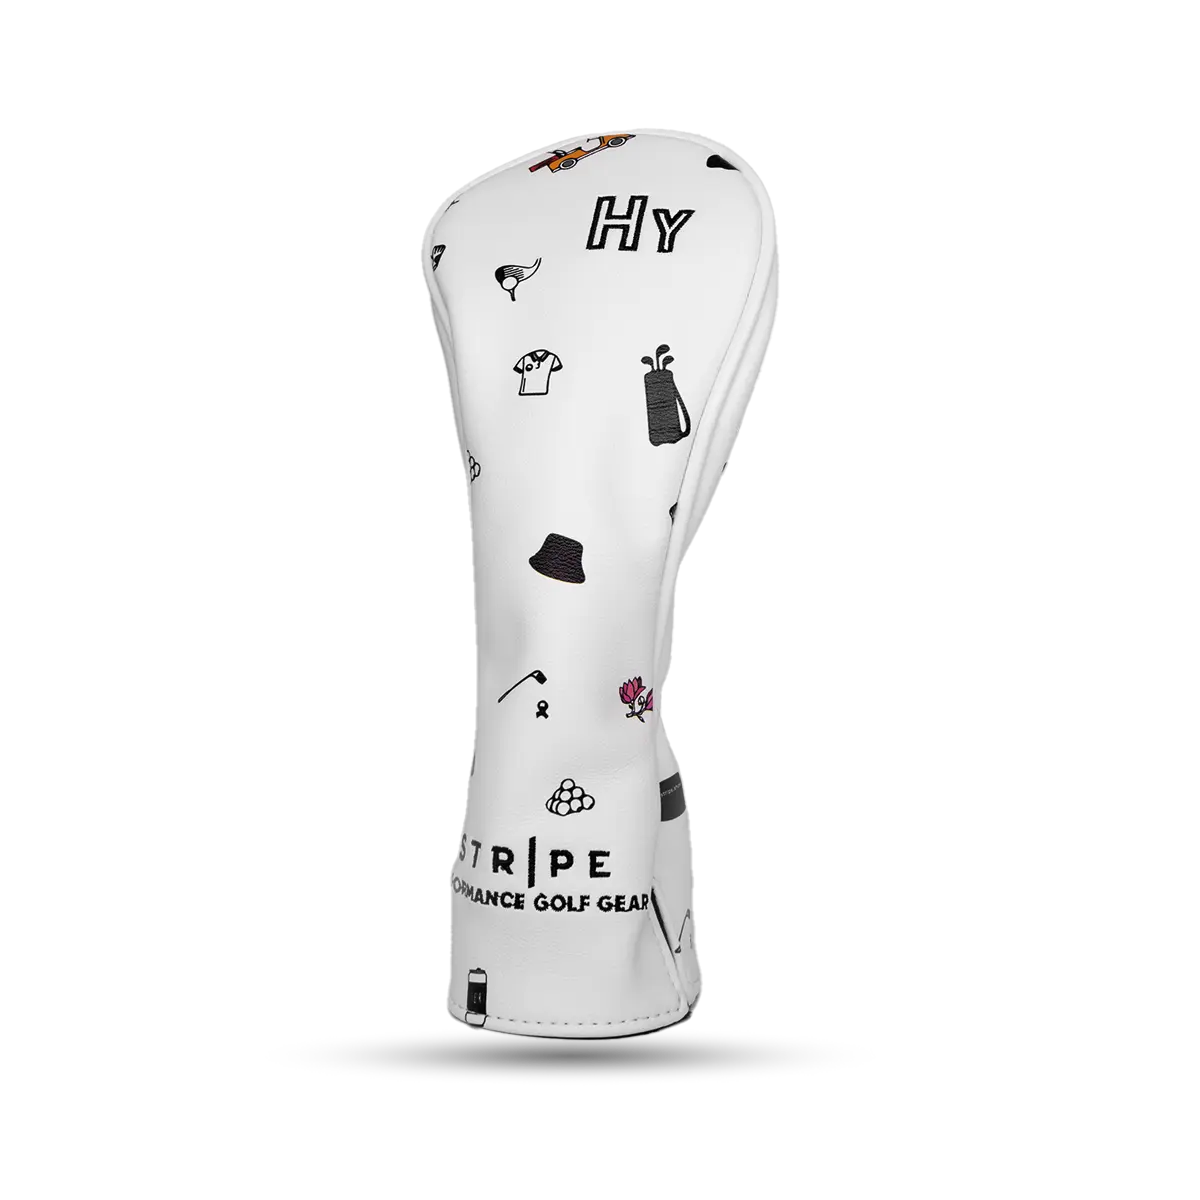 Hybrid headcover in white leather with printed golf pattern and green embroidered details